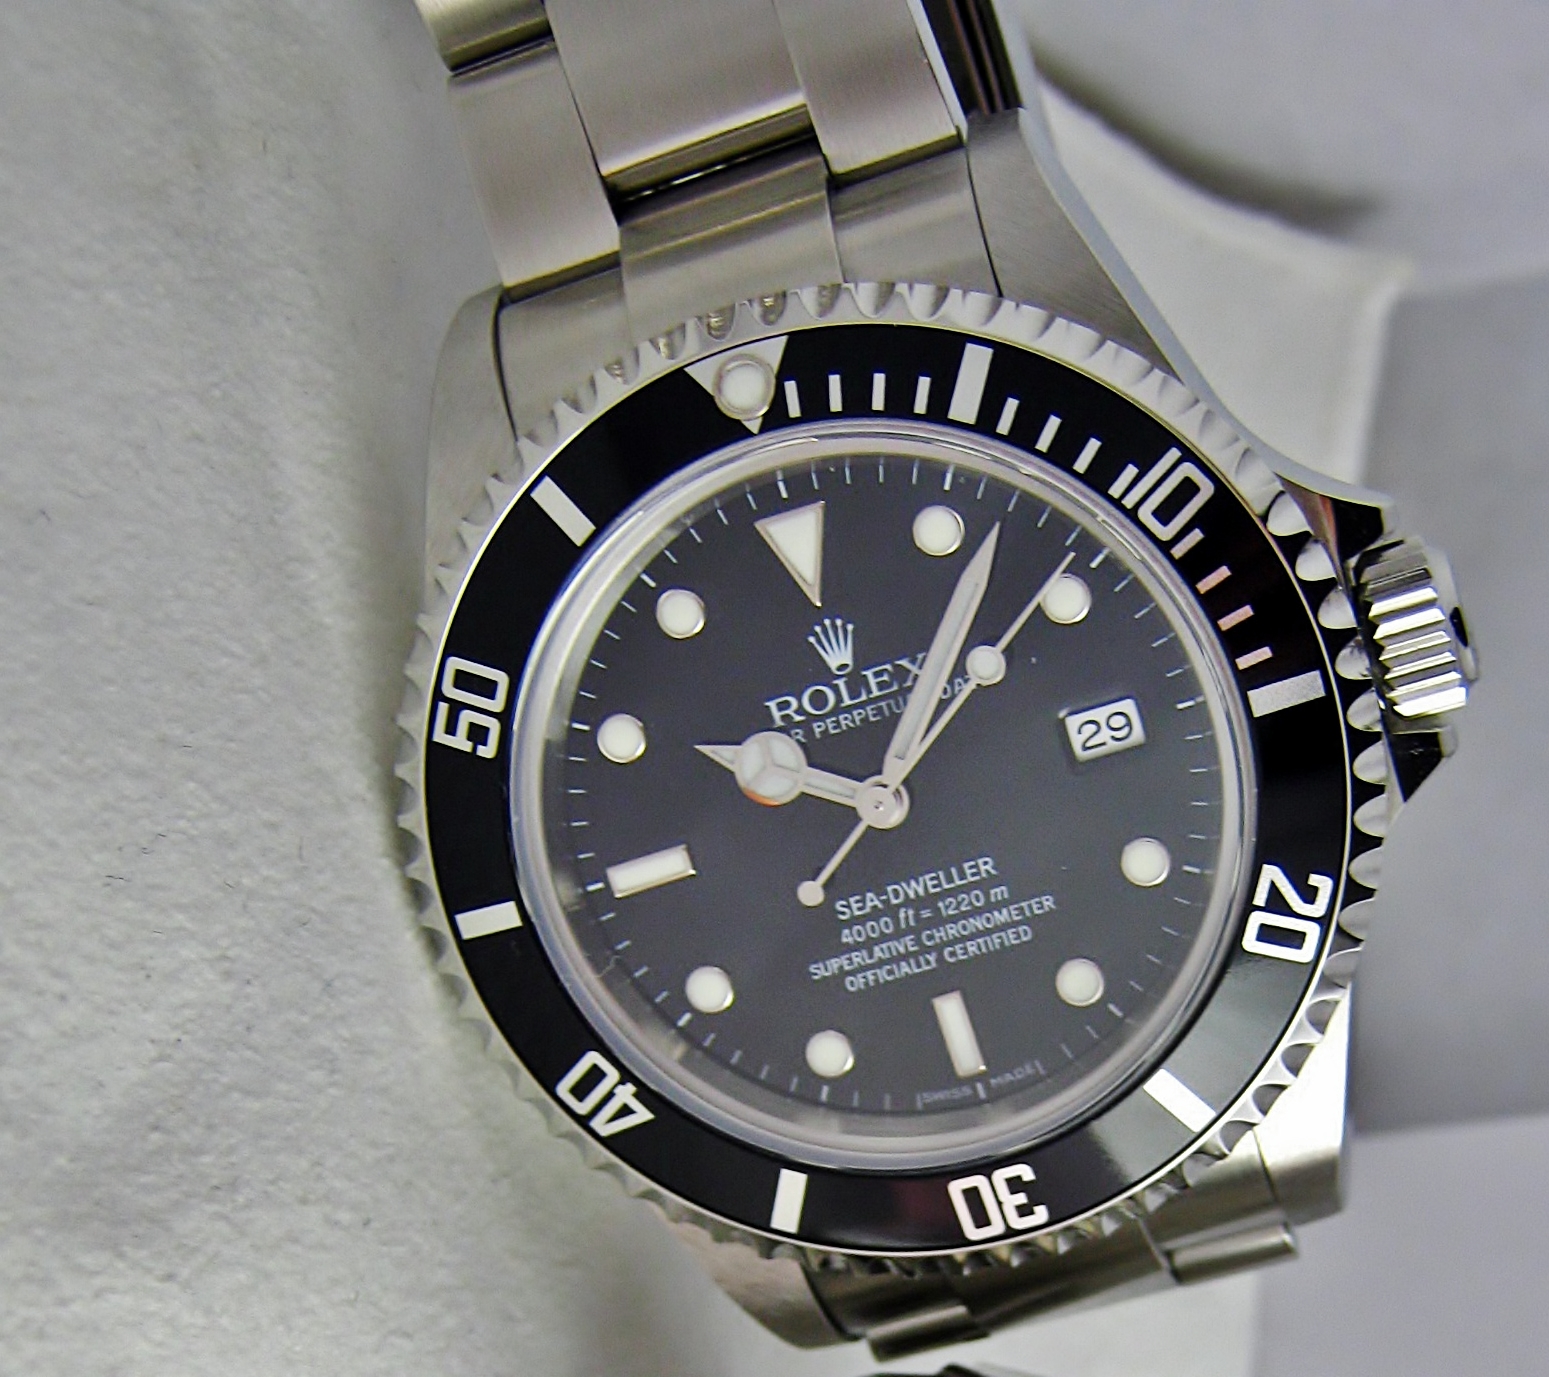 6. Patience Pays Off: A Testimony of Cherishing the Journey towards Acquiring a Coveted Rolex